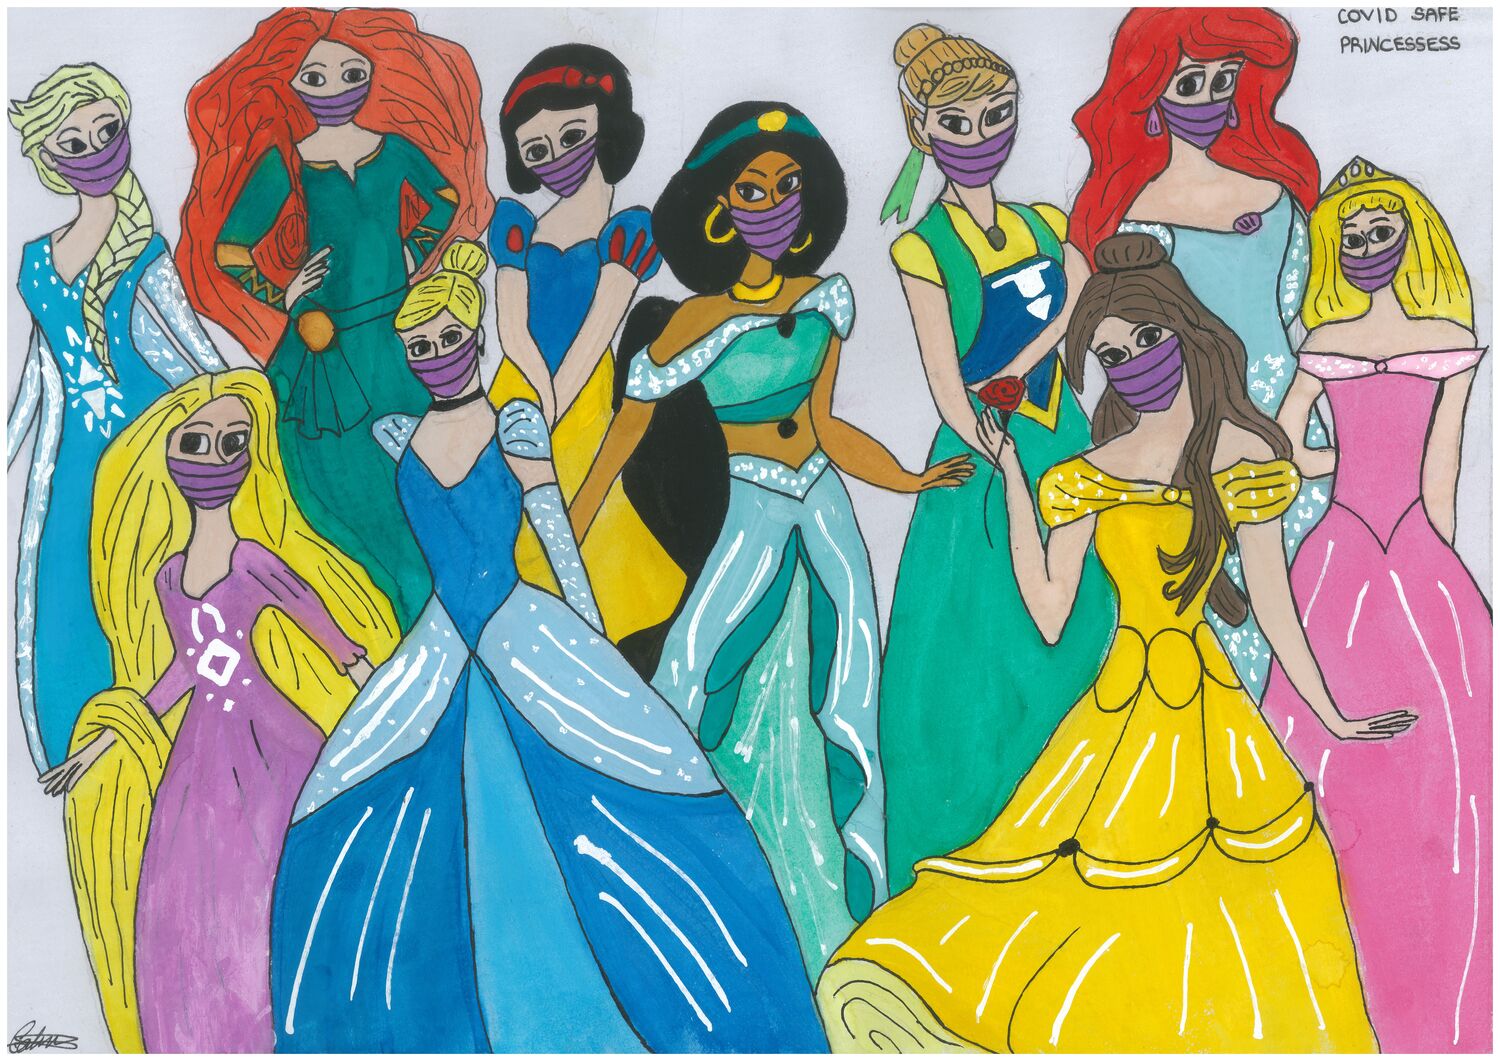 Covid Safe Princesses By Caitlin